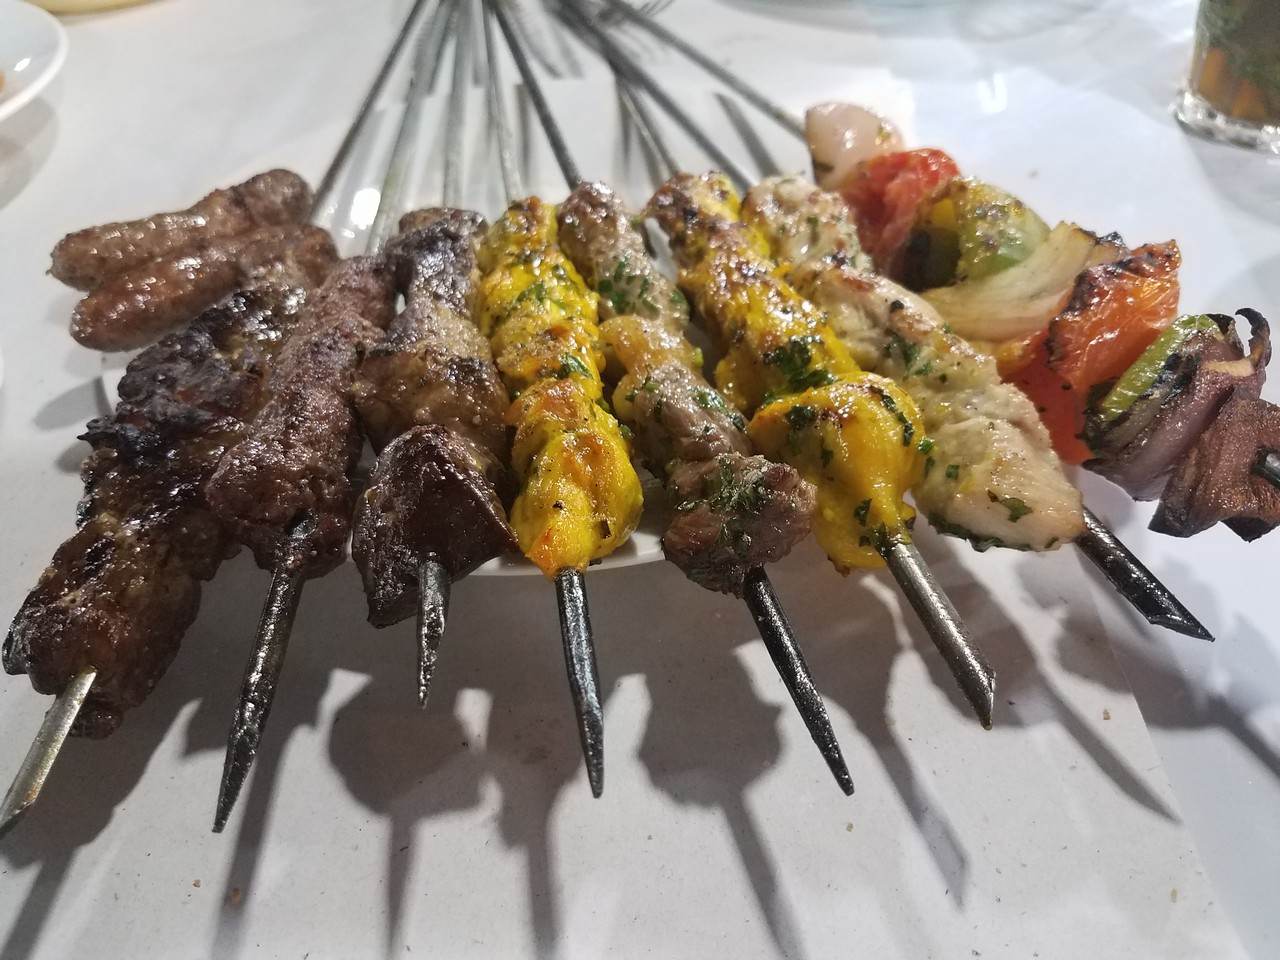 a plate of skewers of meat and vegetables